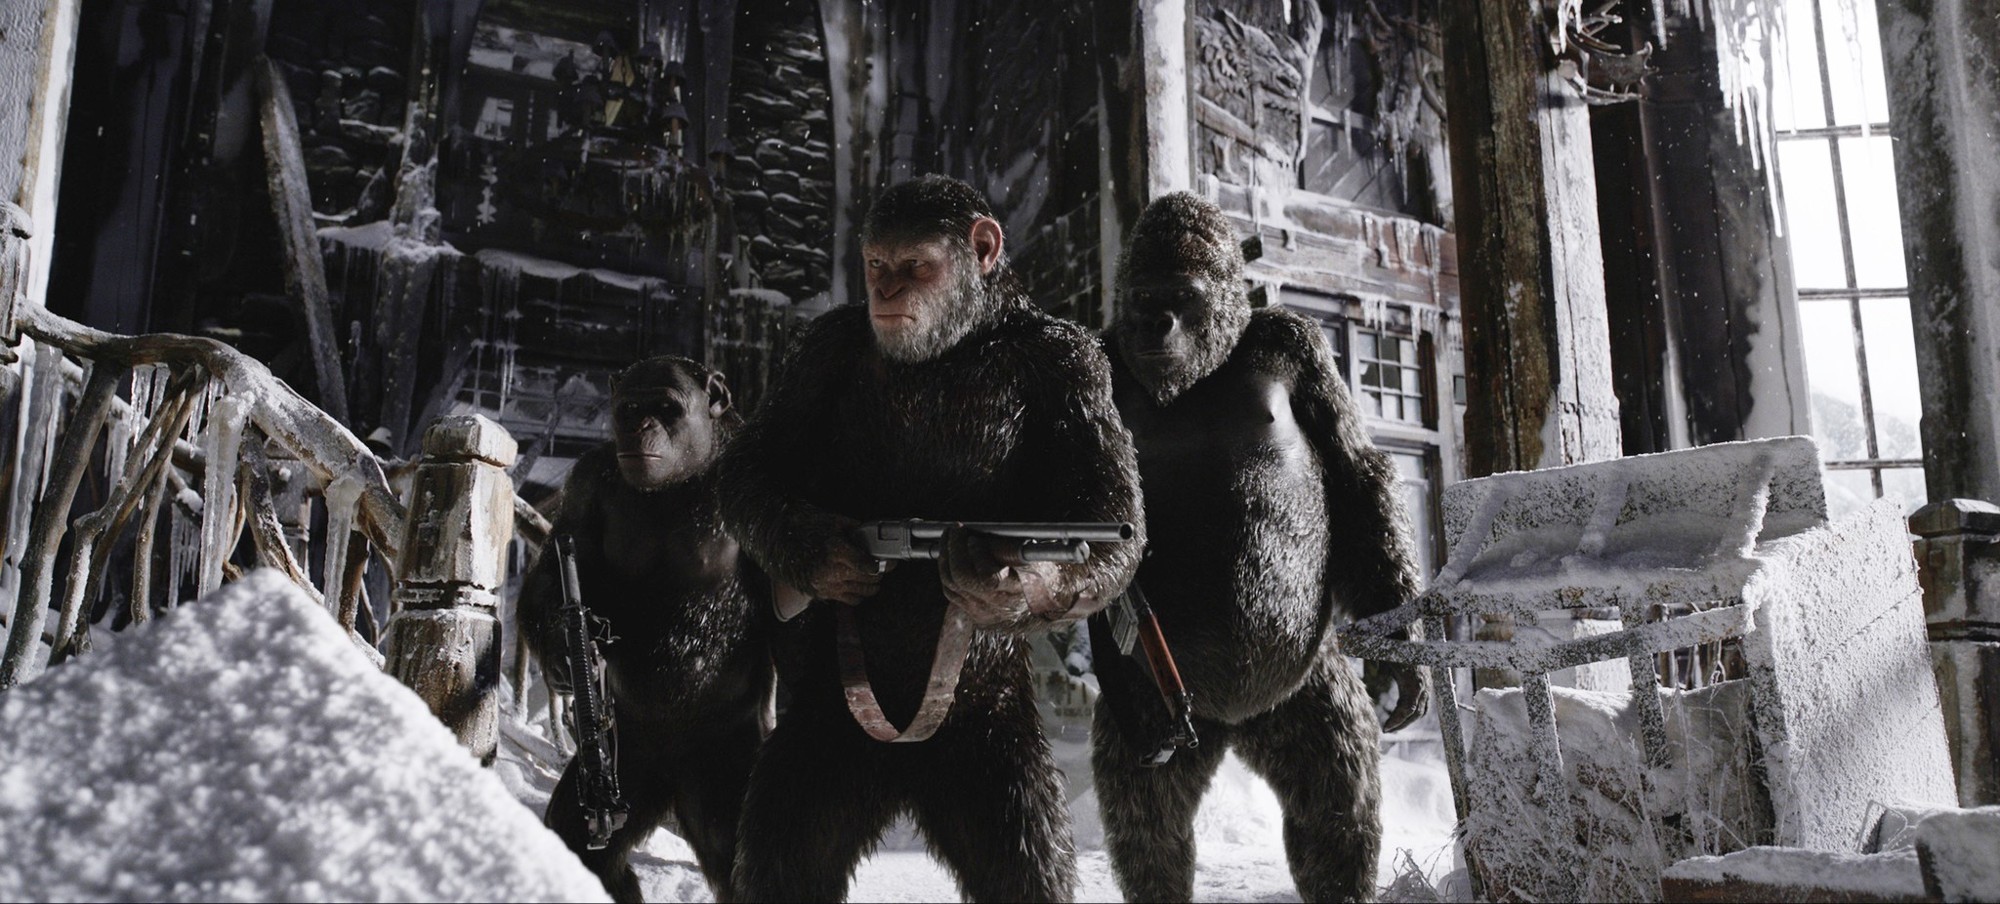 Rocket, Caesar and Luca from 20th Century Fox's War for the Planet of the Apes (2017)